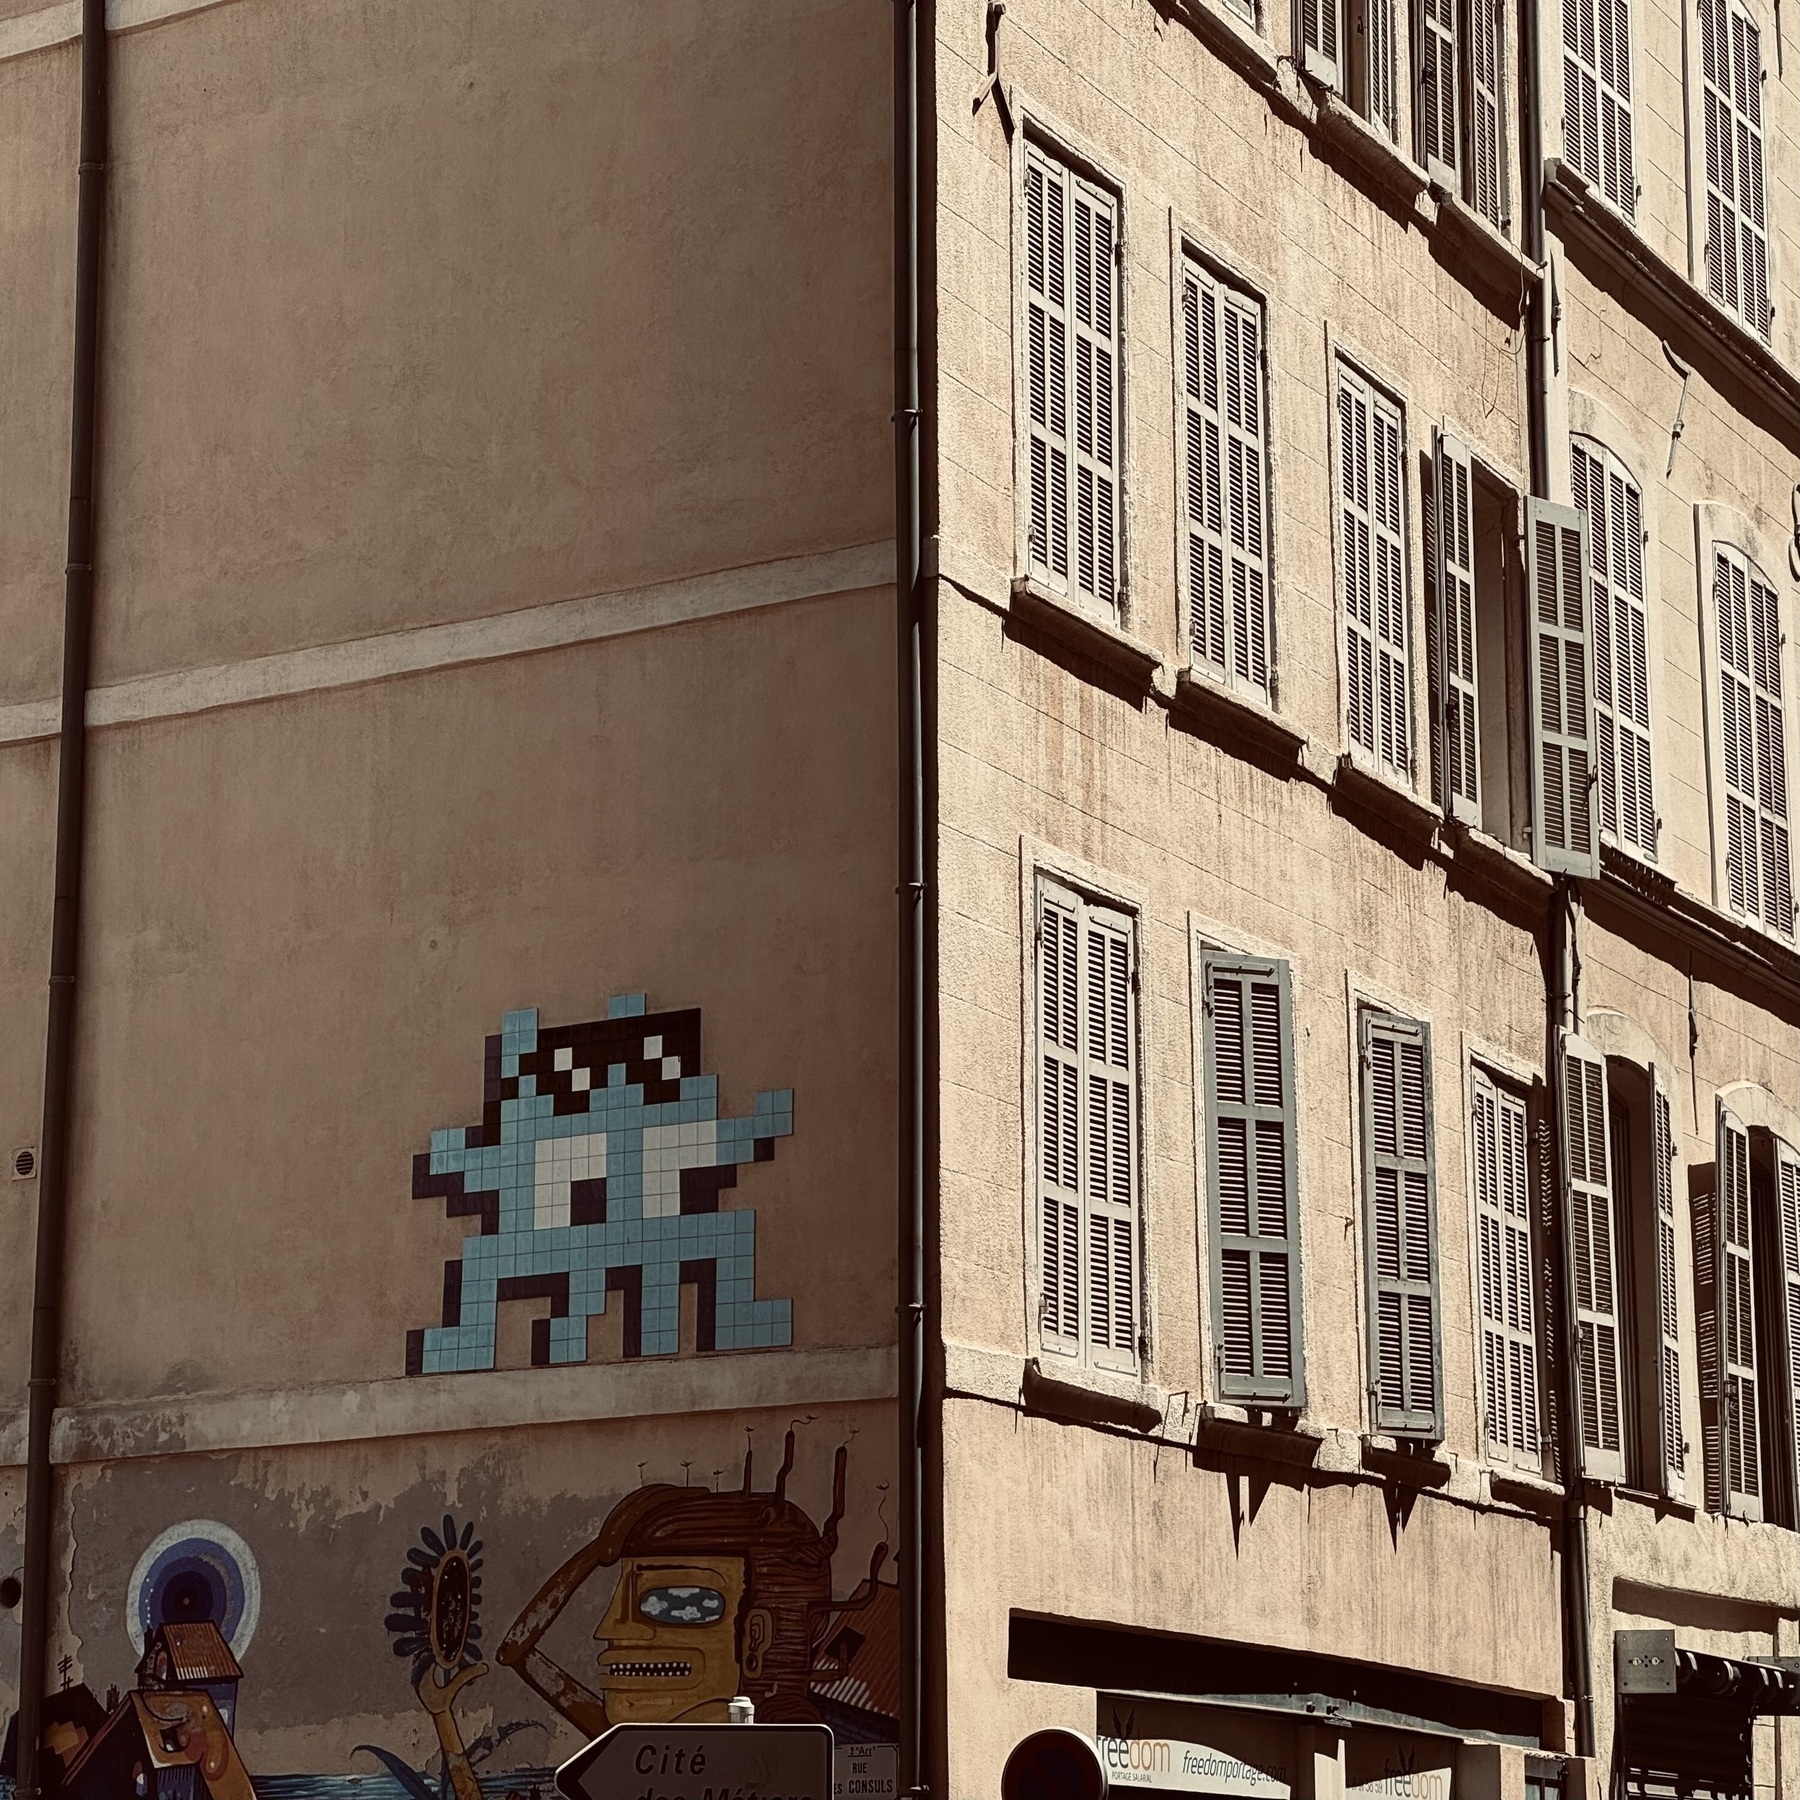 Pixel art on the shady side of a building, with the other face of the building in the sunlight.